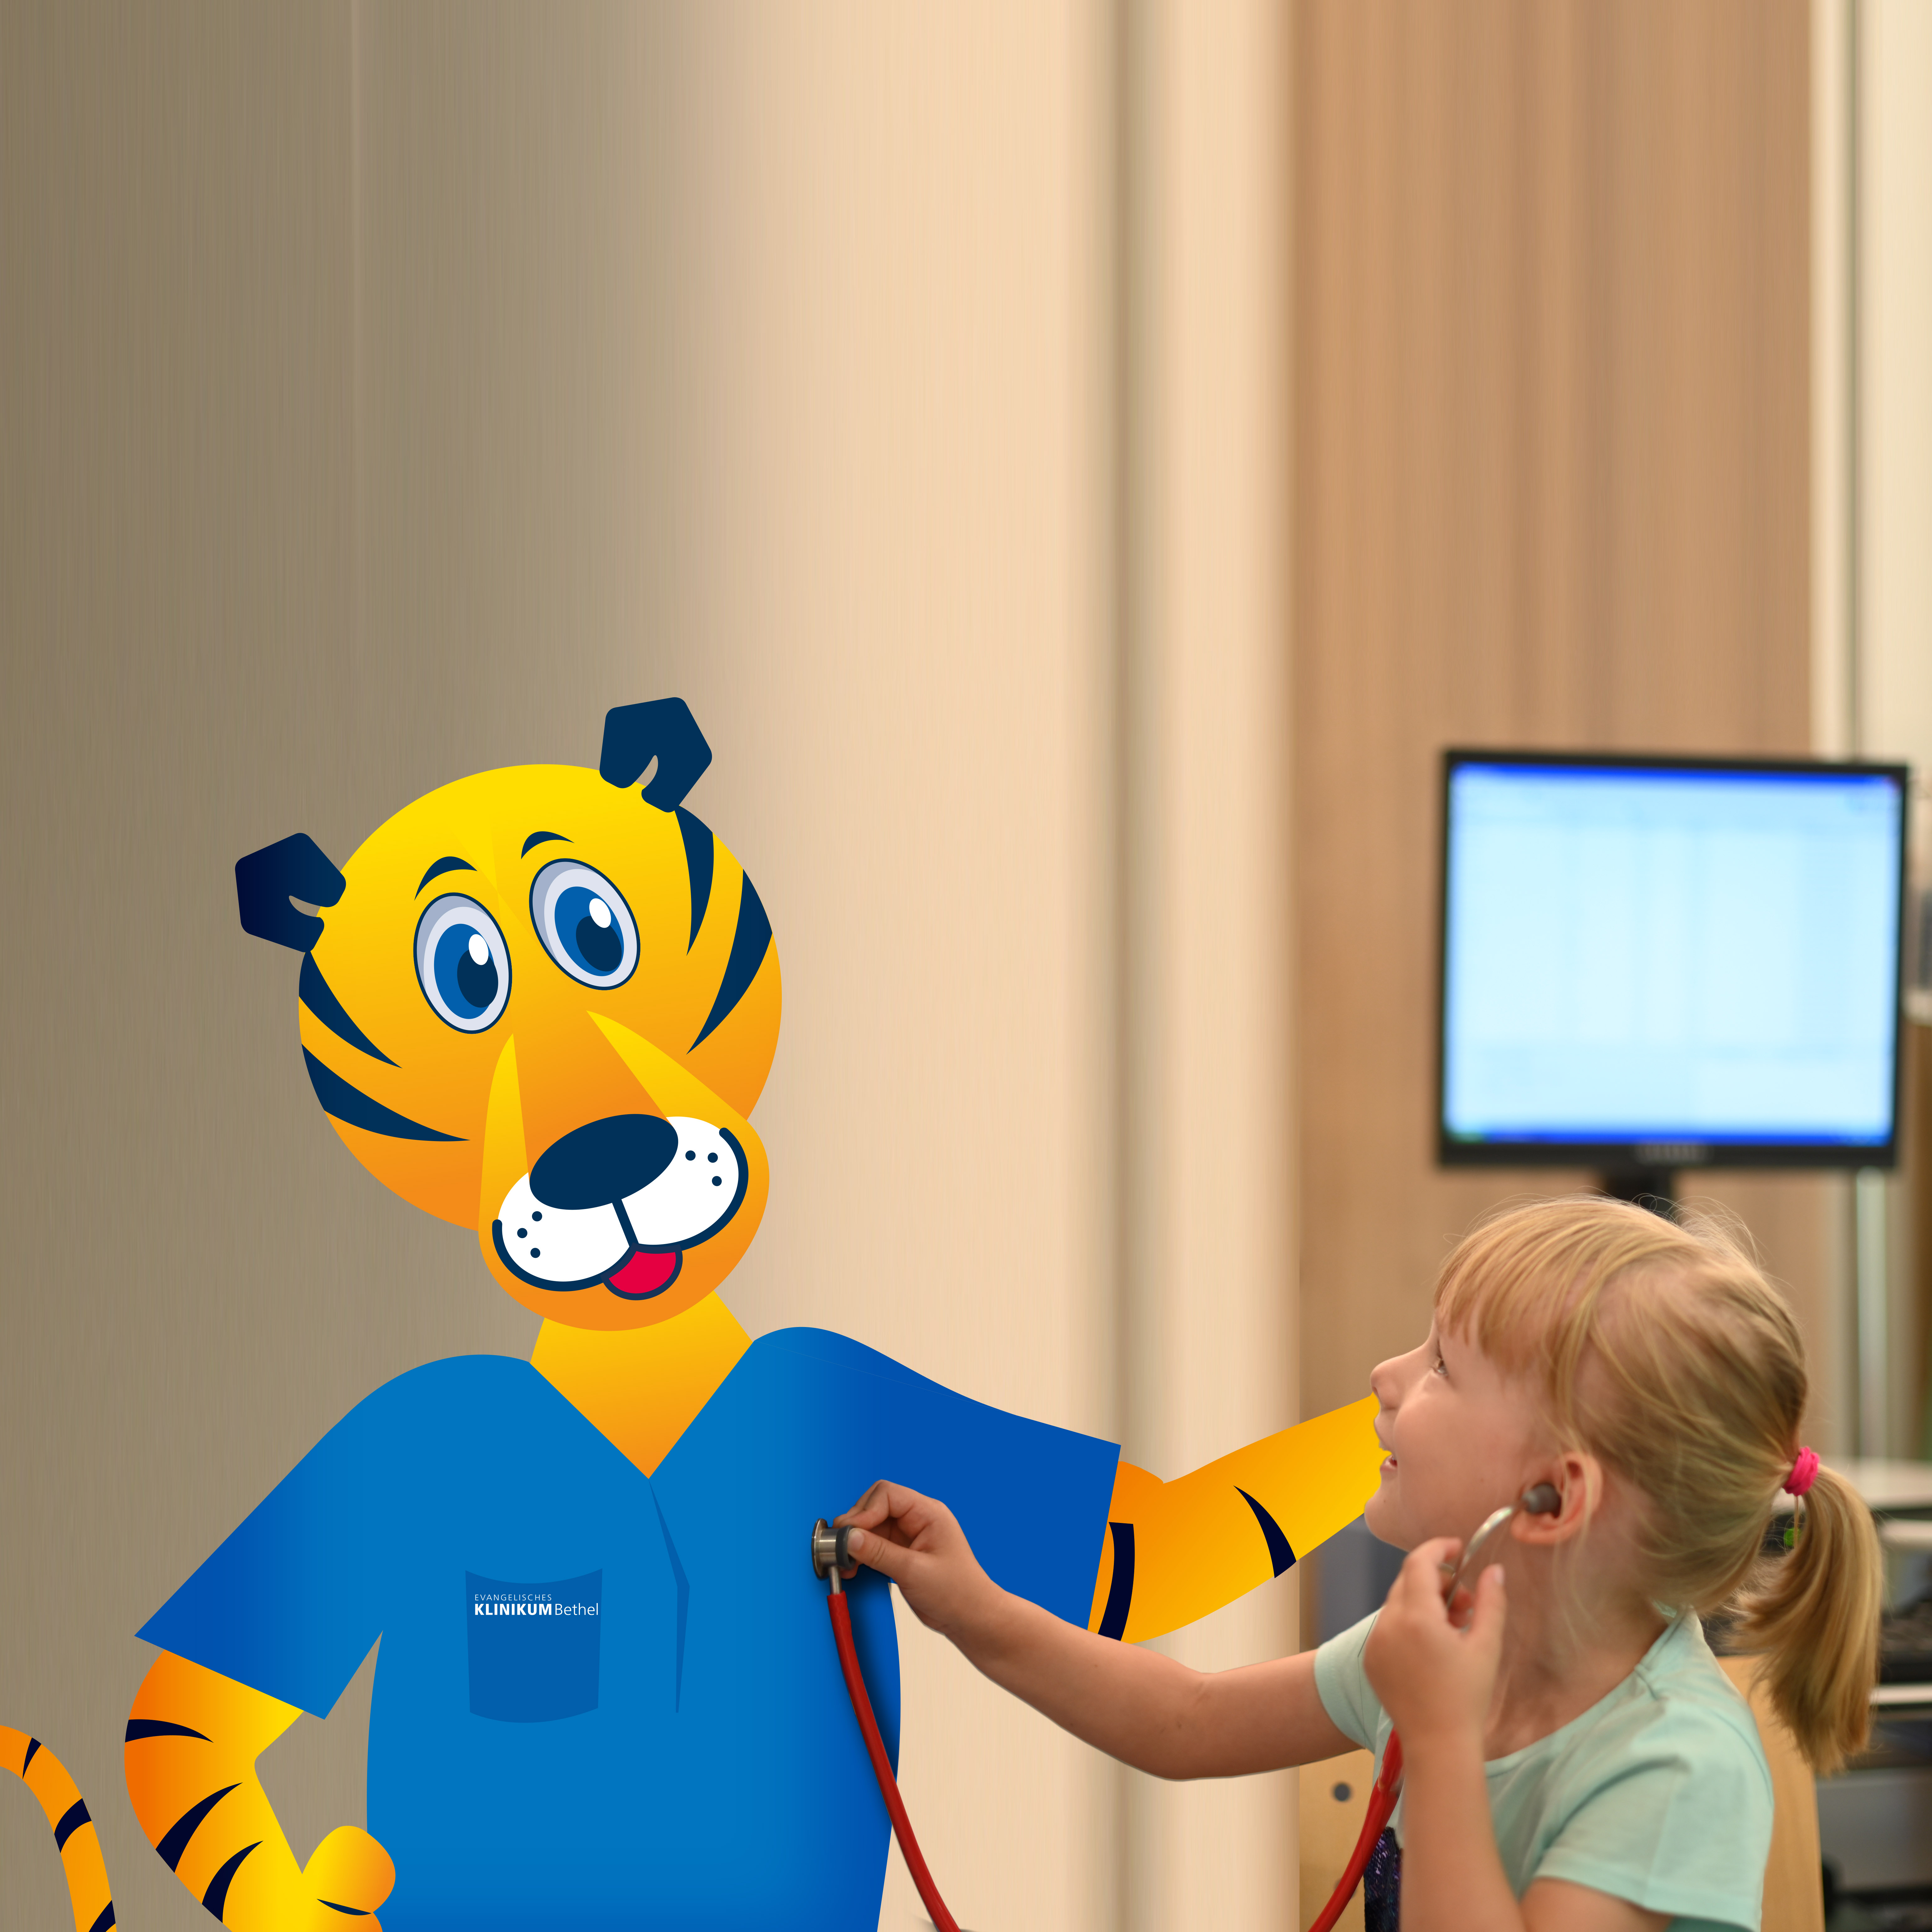 Photo Montage: Girl listens to tiger with stethoscope